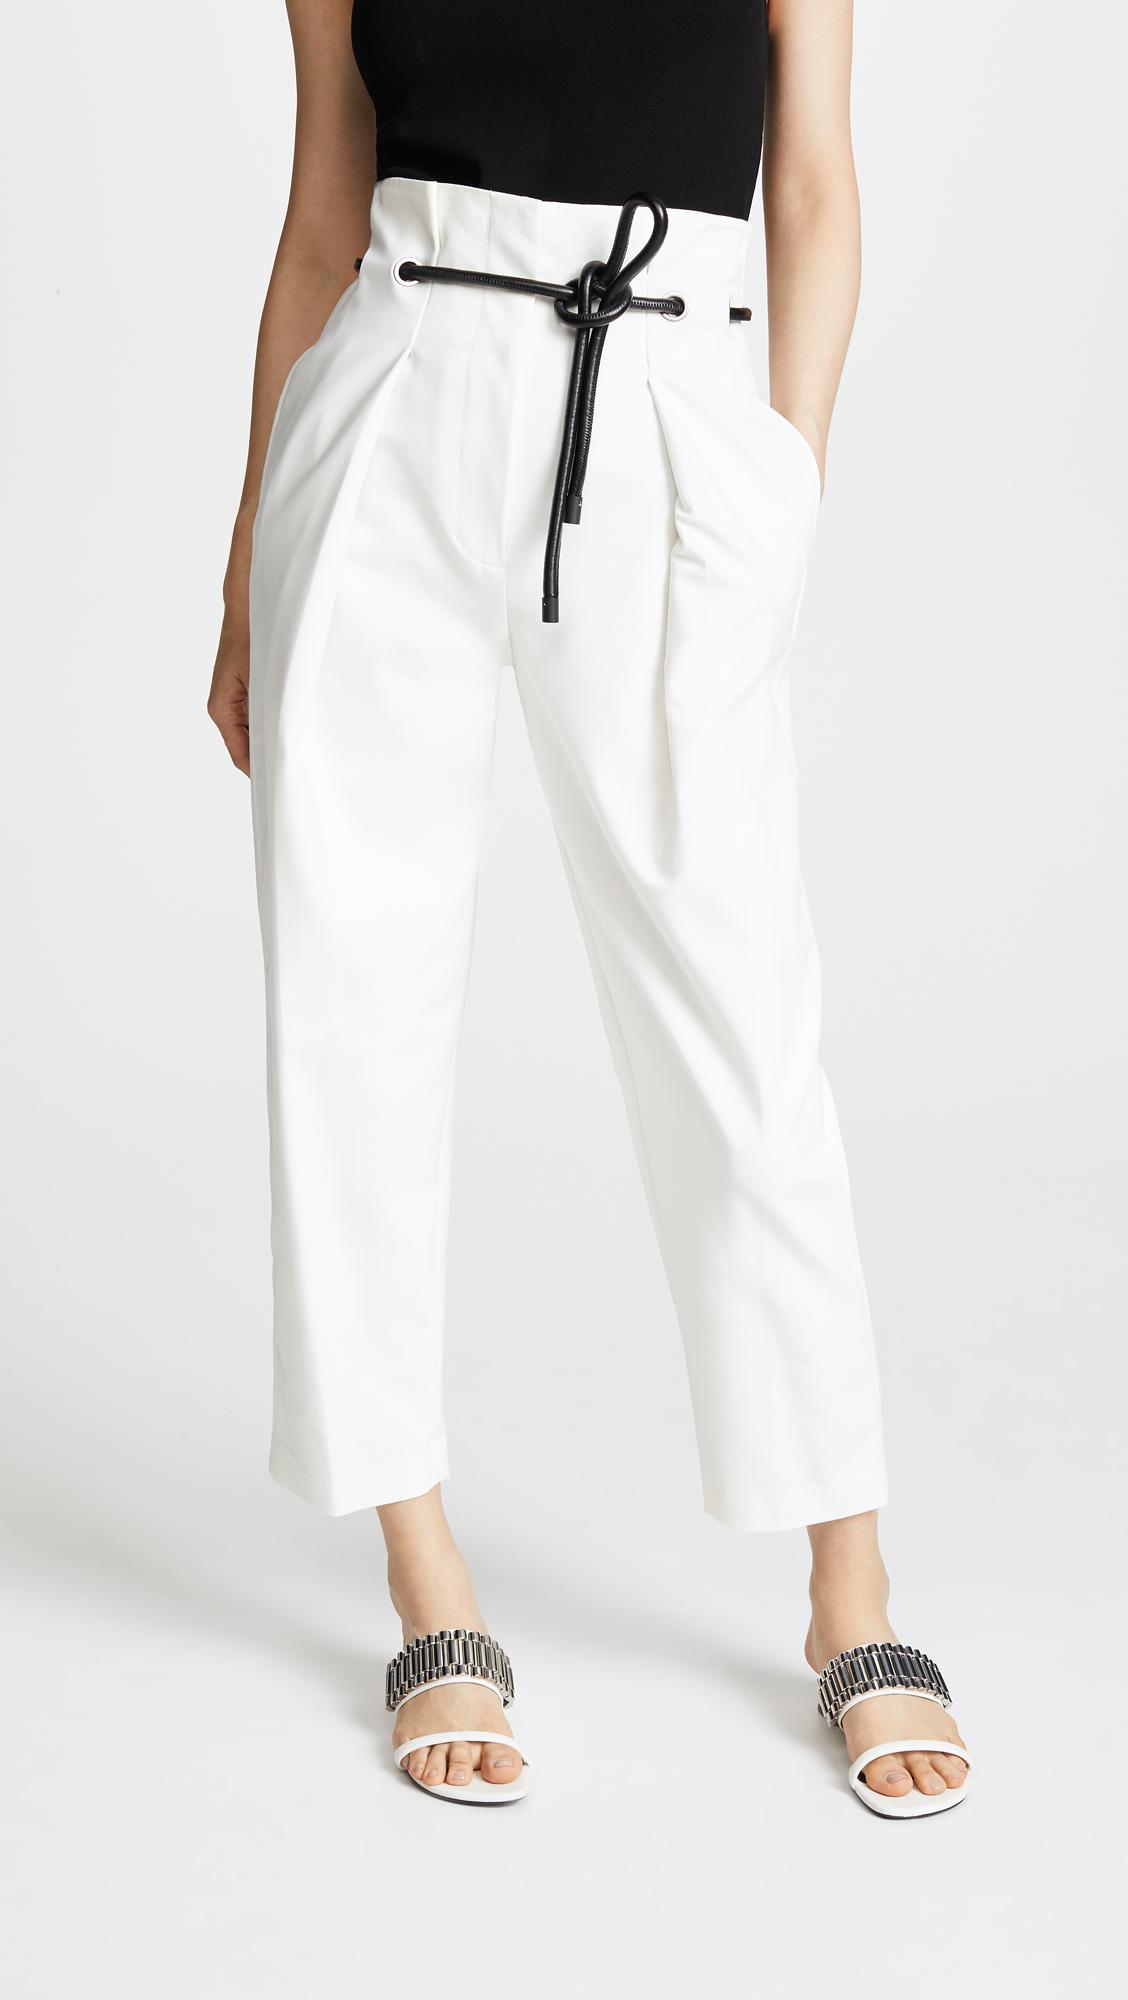 Lyst - 3.1 Phillip Lim Origami Pants in White